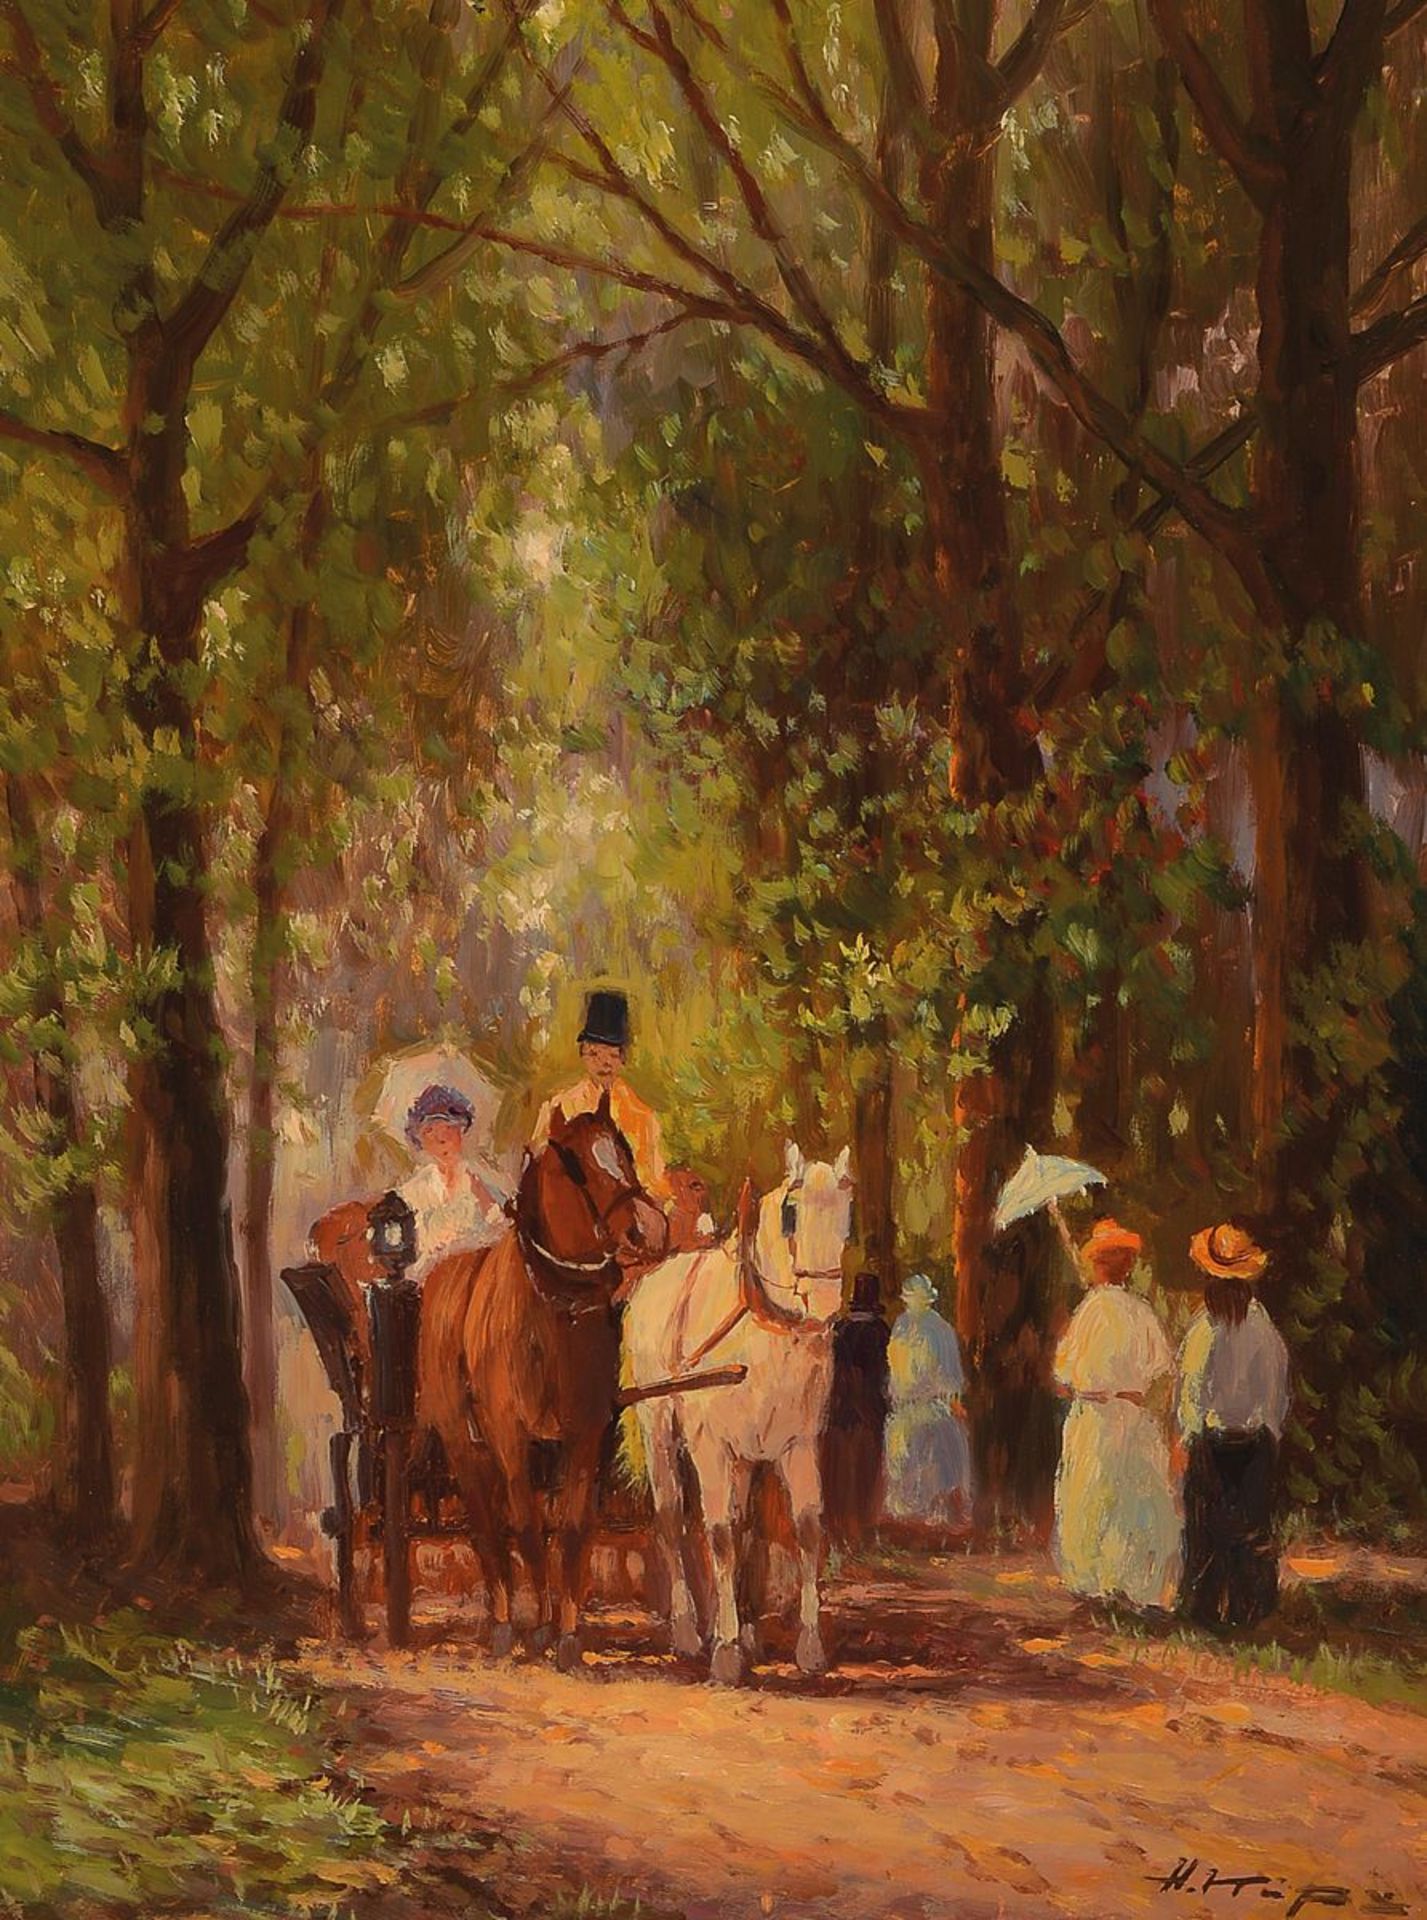 Helmut Kips, born 1937 Krefeld, carriage and stroller in forest, oil / wood, signed lower right,